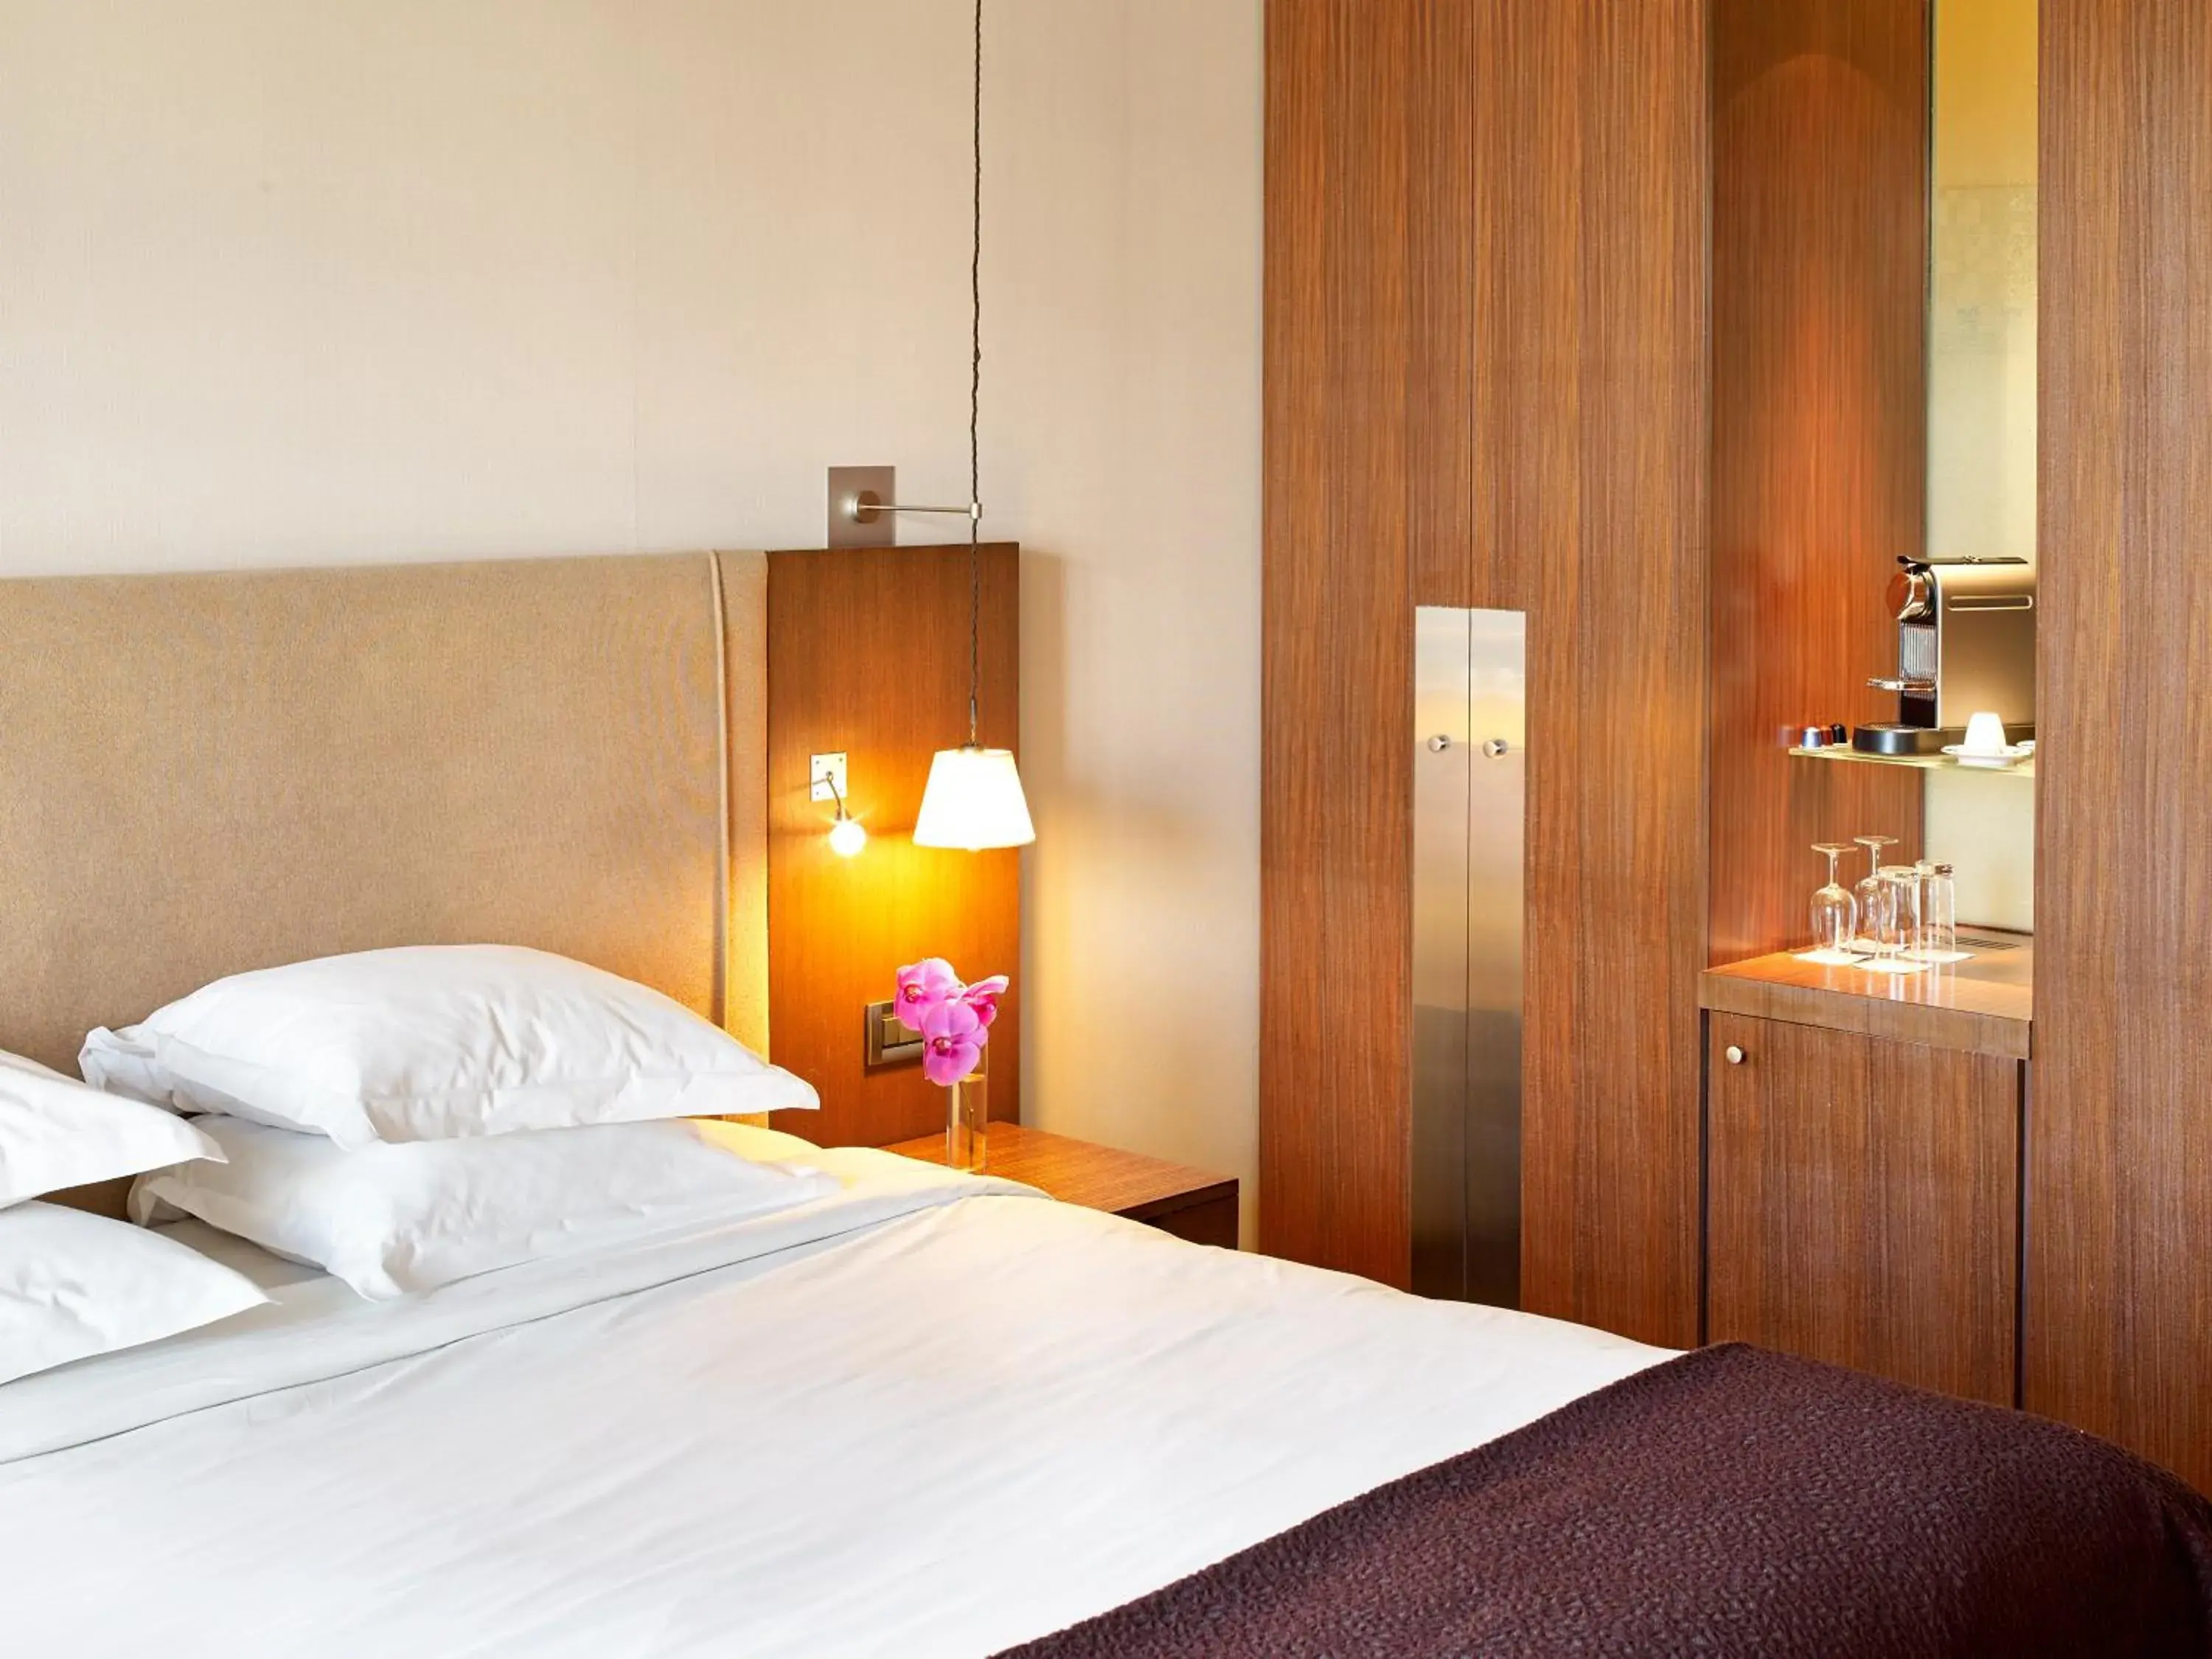 Premium Room with Balcony and Arc de Triomphe View in Radisson Blu Hotel Champs Elysees (Pet-friendly)